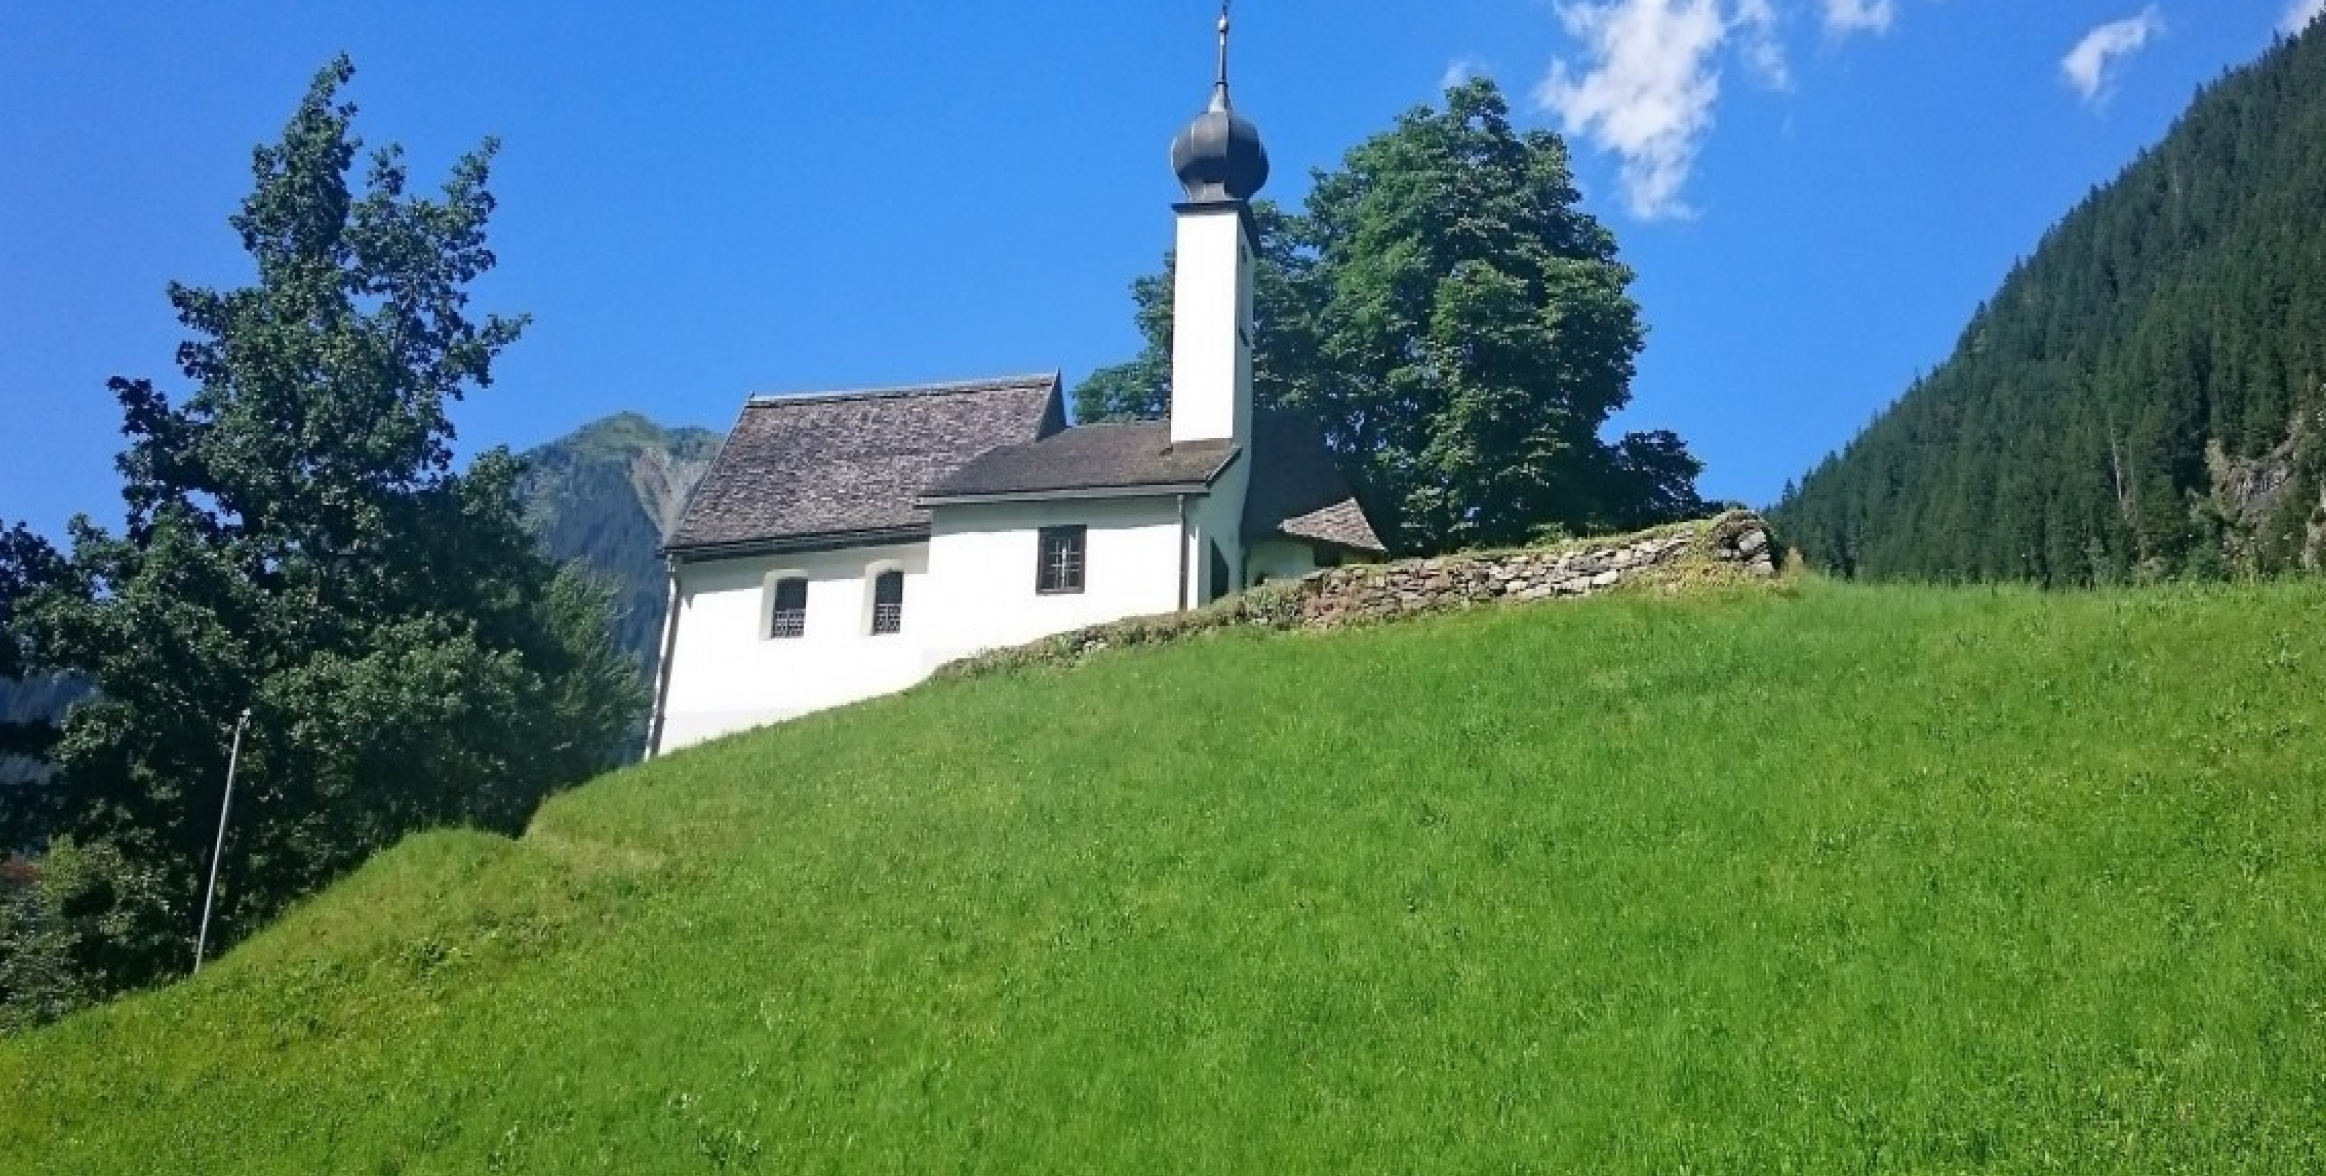 gallery/church_hilltop_building_alps_countryside_scenery_panoramic_mountain-491953